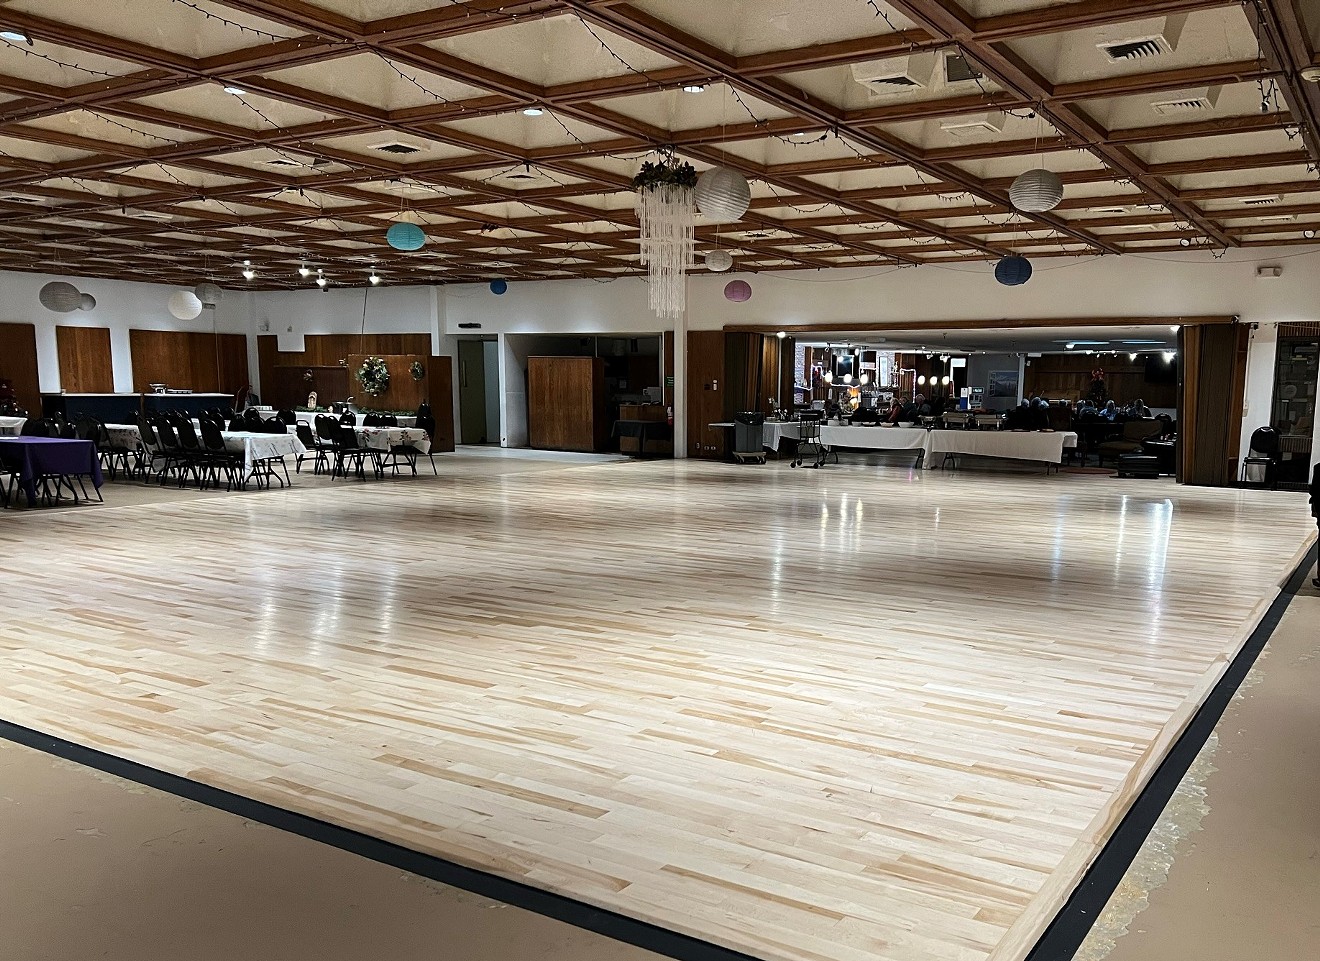 Boulder Elks Lodge and Event Center's new 3,000-square-foot dance floor